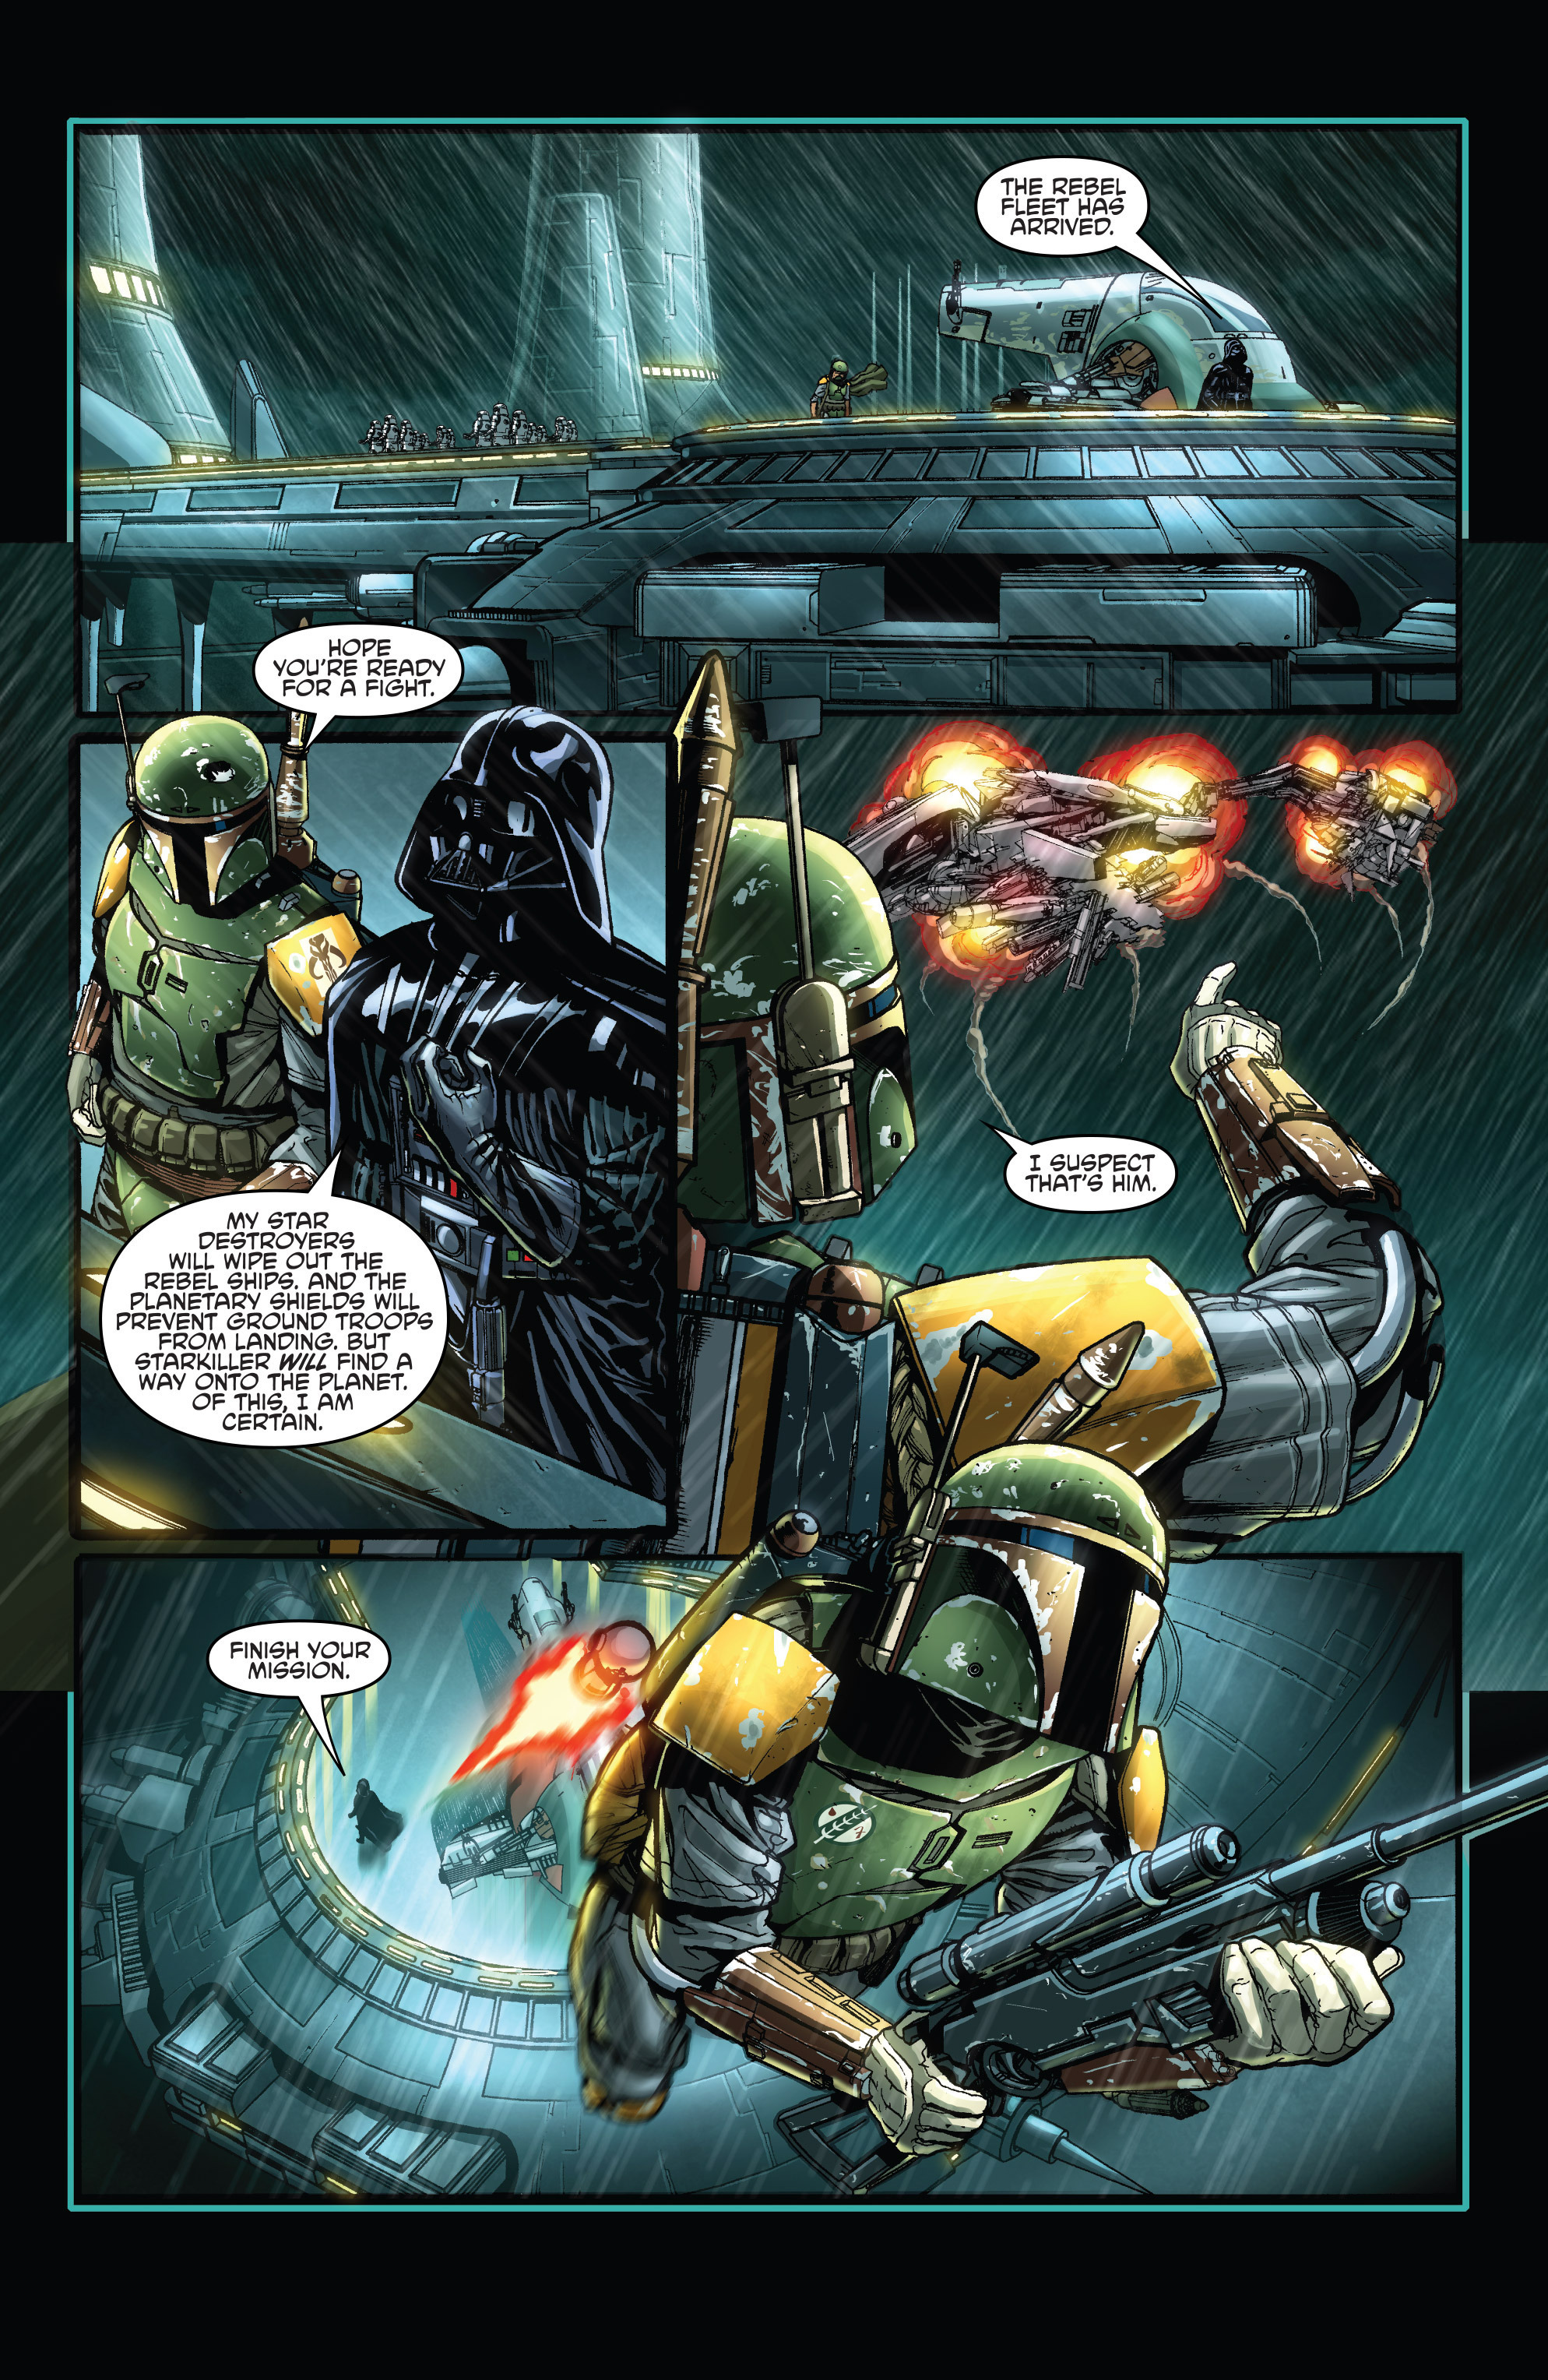 Read online Star Wars: The Force Unleashed II comic -  Issue # Full - 54